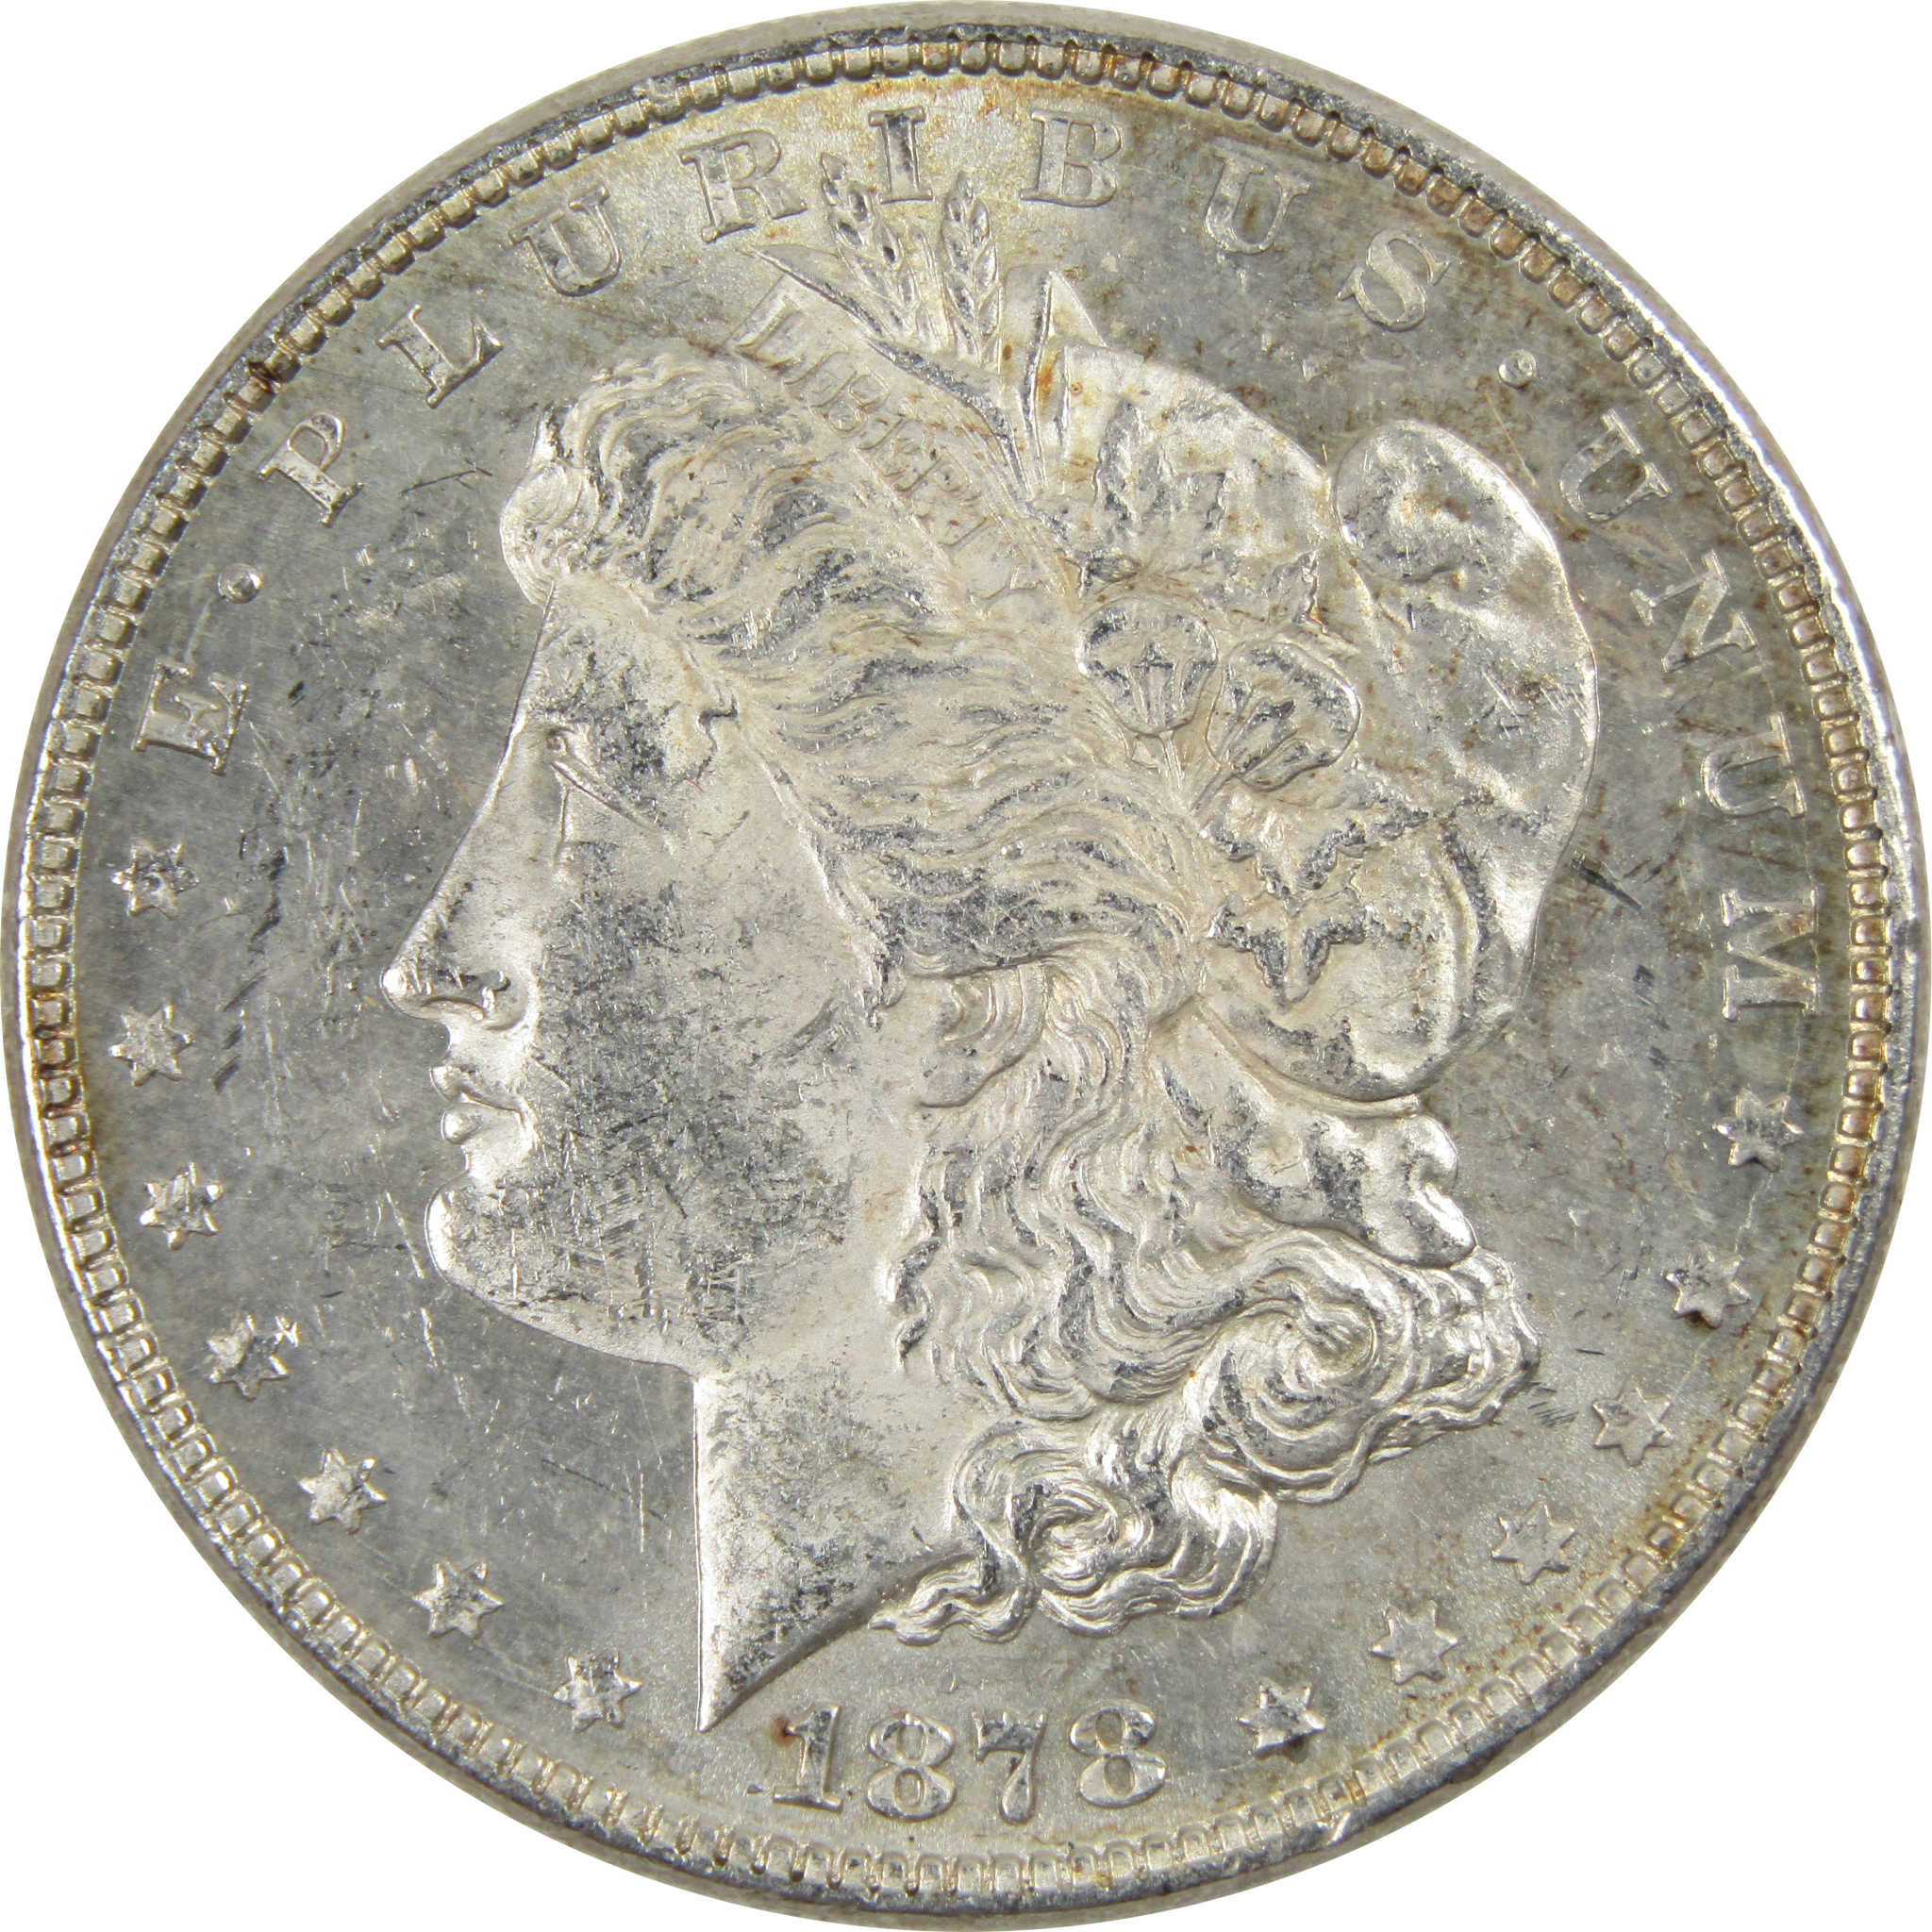 1878 8TF Morgan Dollar BU Uncirculated Mint State 90% Silver SKU:I3839 - Morgan coin - Morgan silver dollar - Morgan silver dollar for sale - Profile Coins &amp; Collectibles